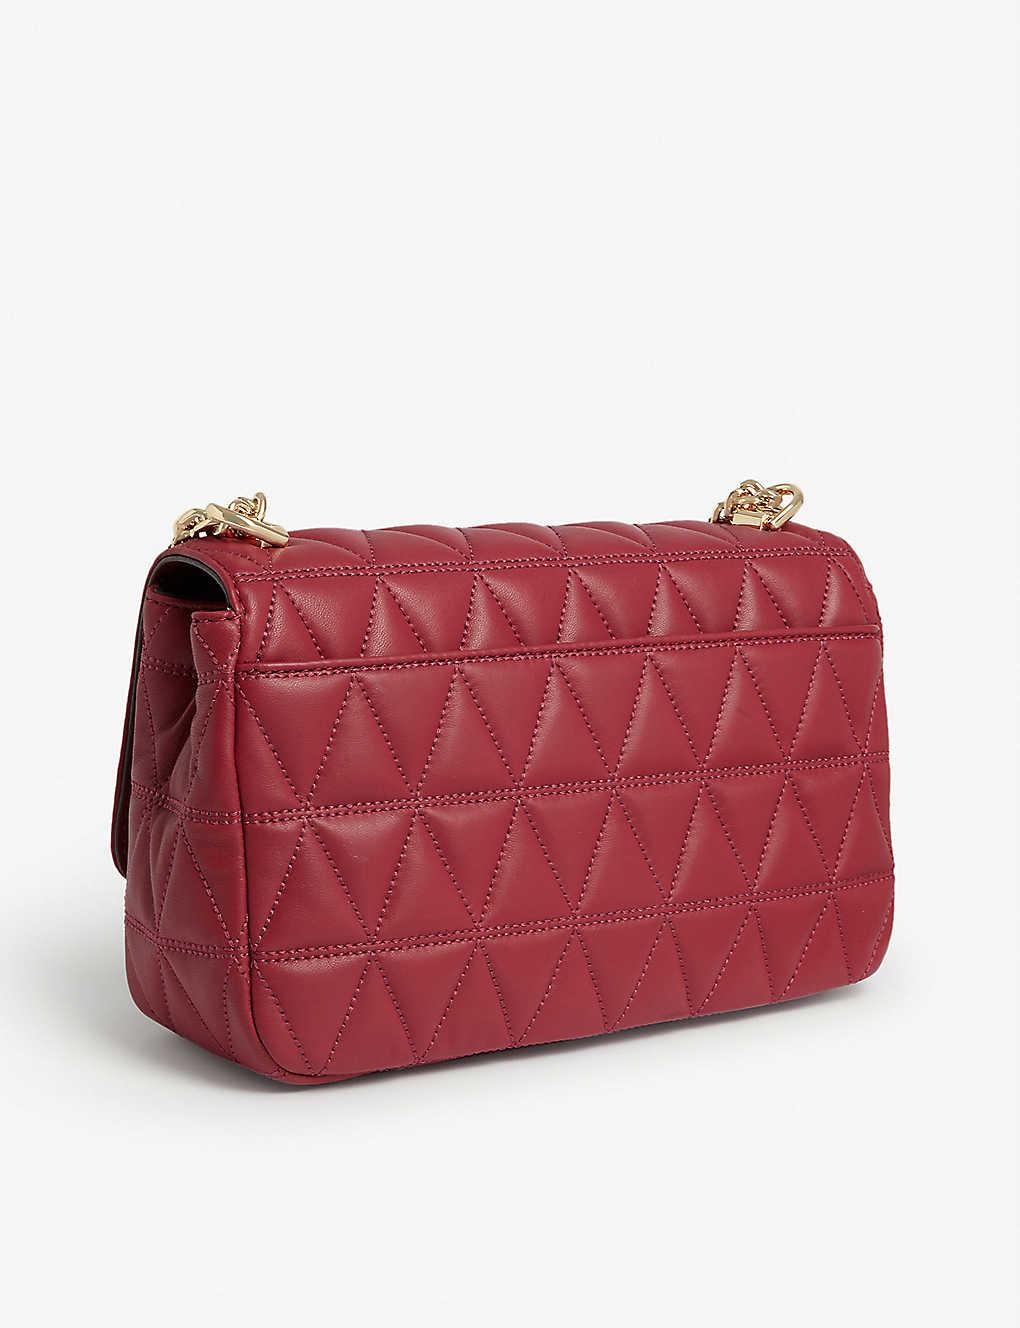 MICHAEL Michael Kors Sloan Large Quilted Leather Shoulder Bag in Berry  (Red) | Lyst